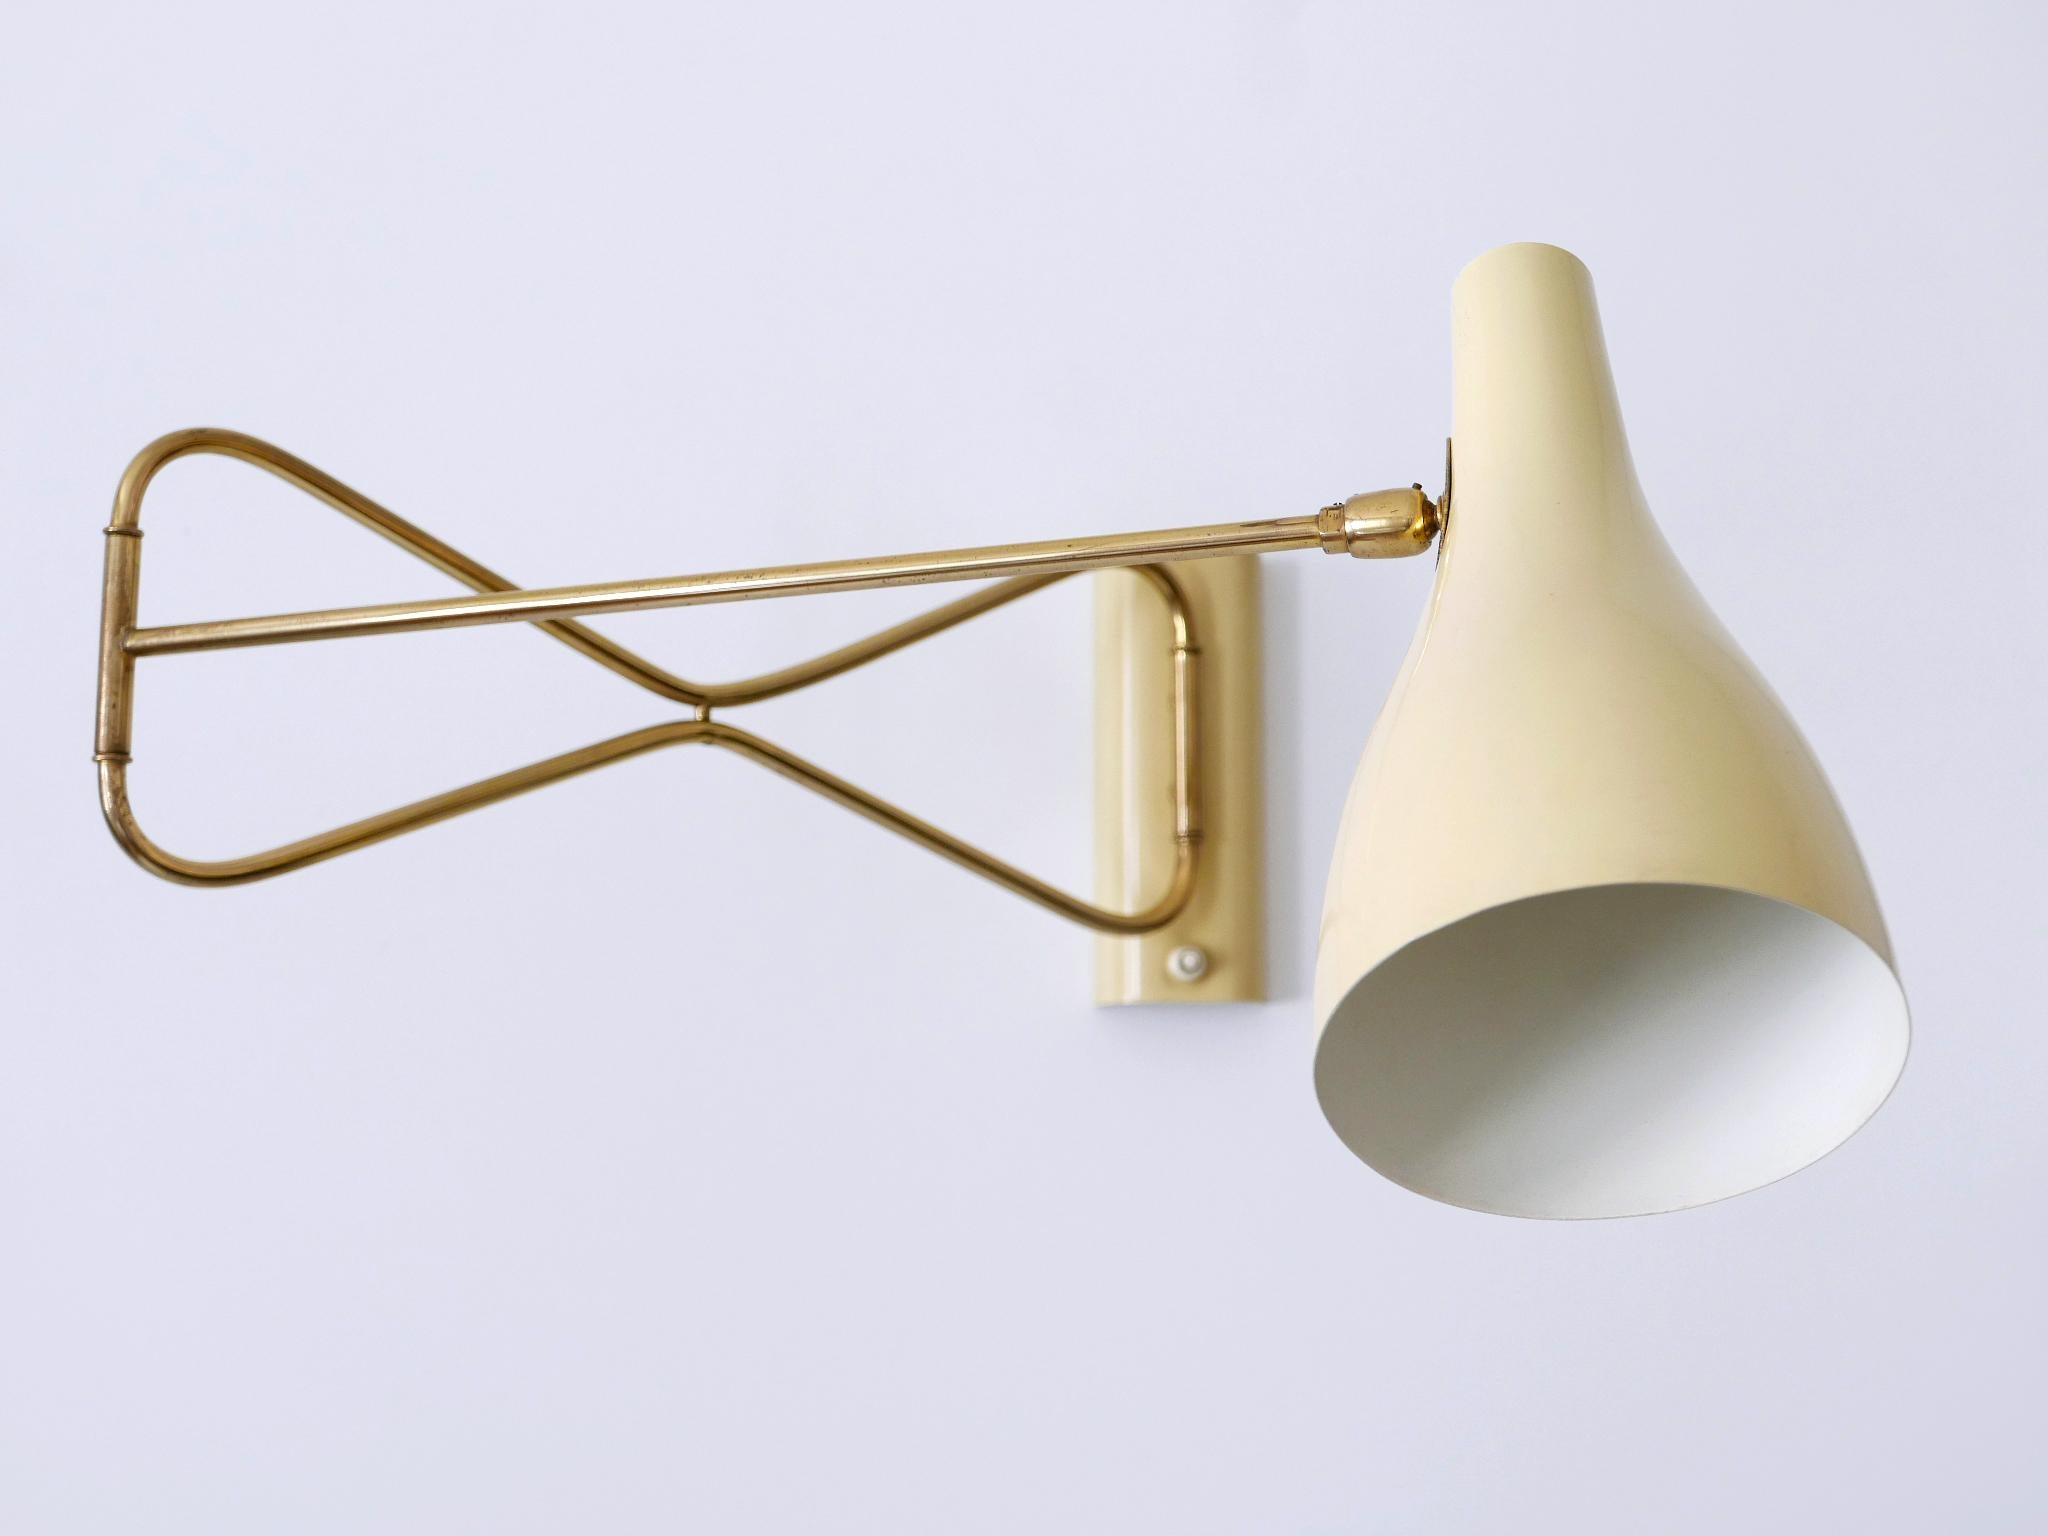 Rare & Elegant Mid Century Modern Wall Lamp '9590/28' by Cosack Germany 1950s For Sale 5